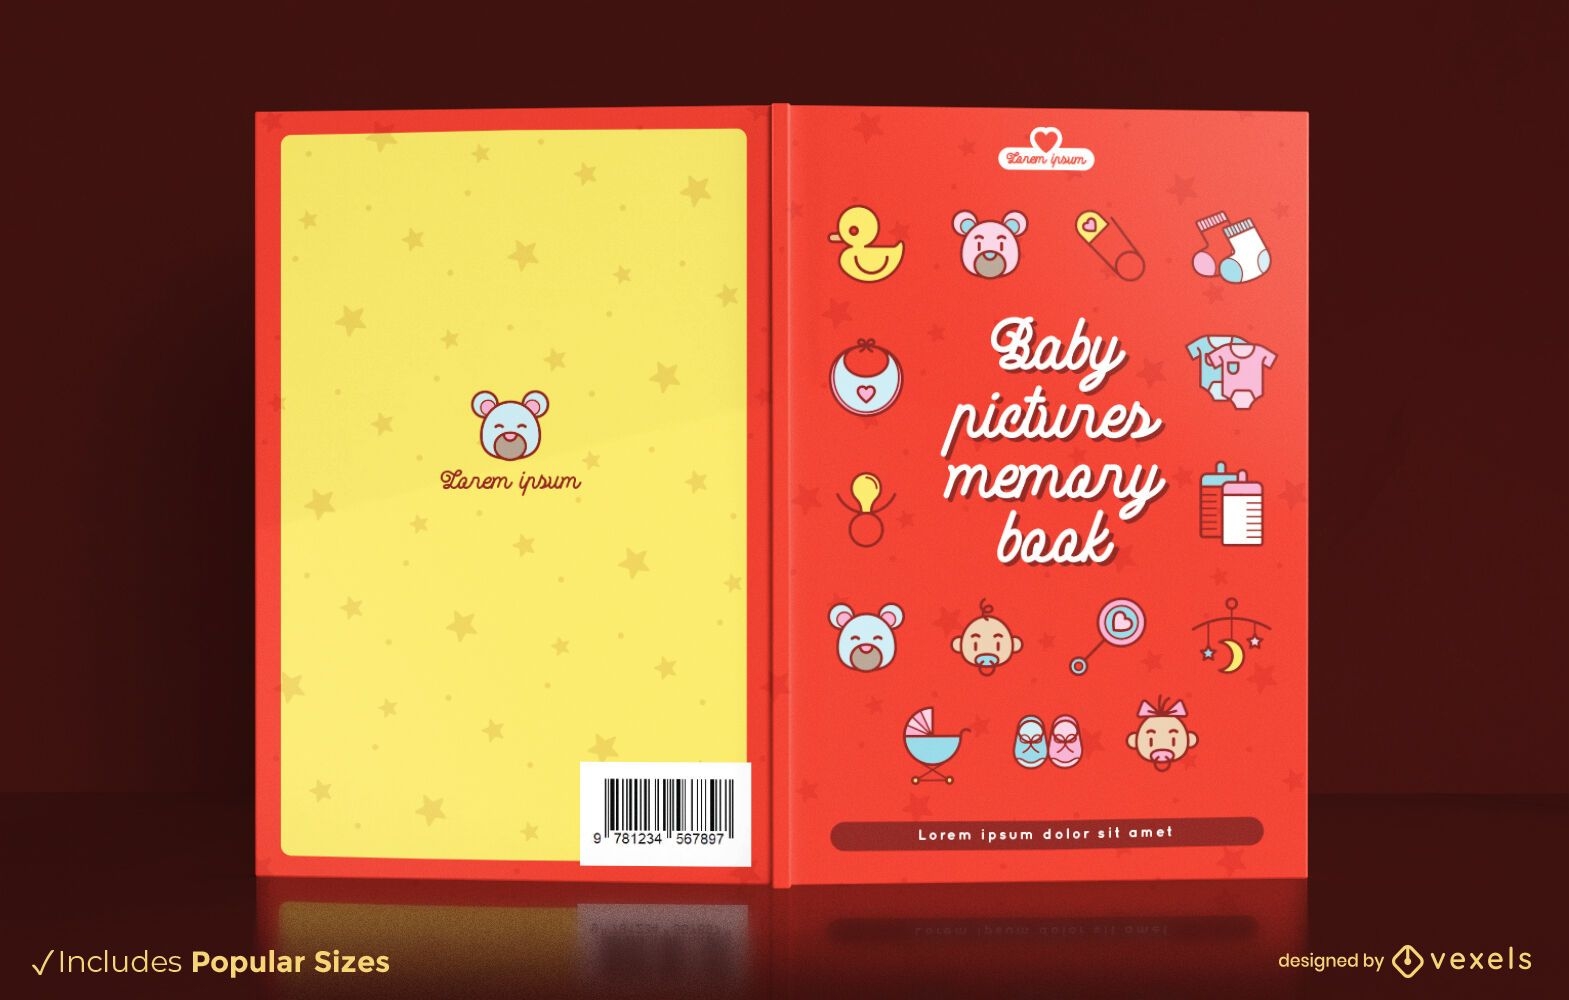 Baby pictures book cover design 